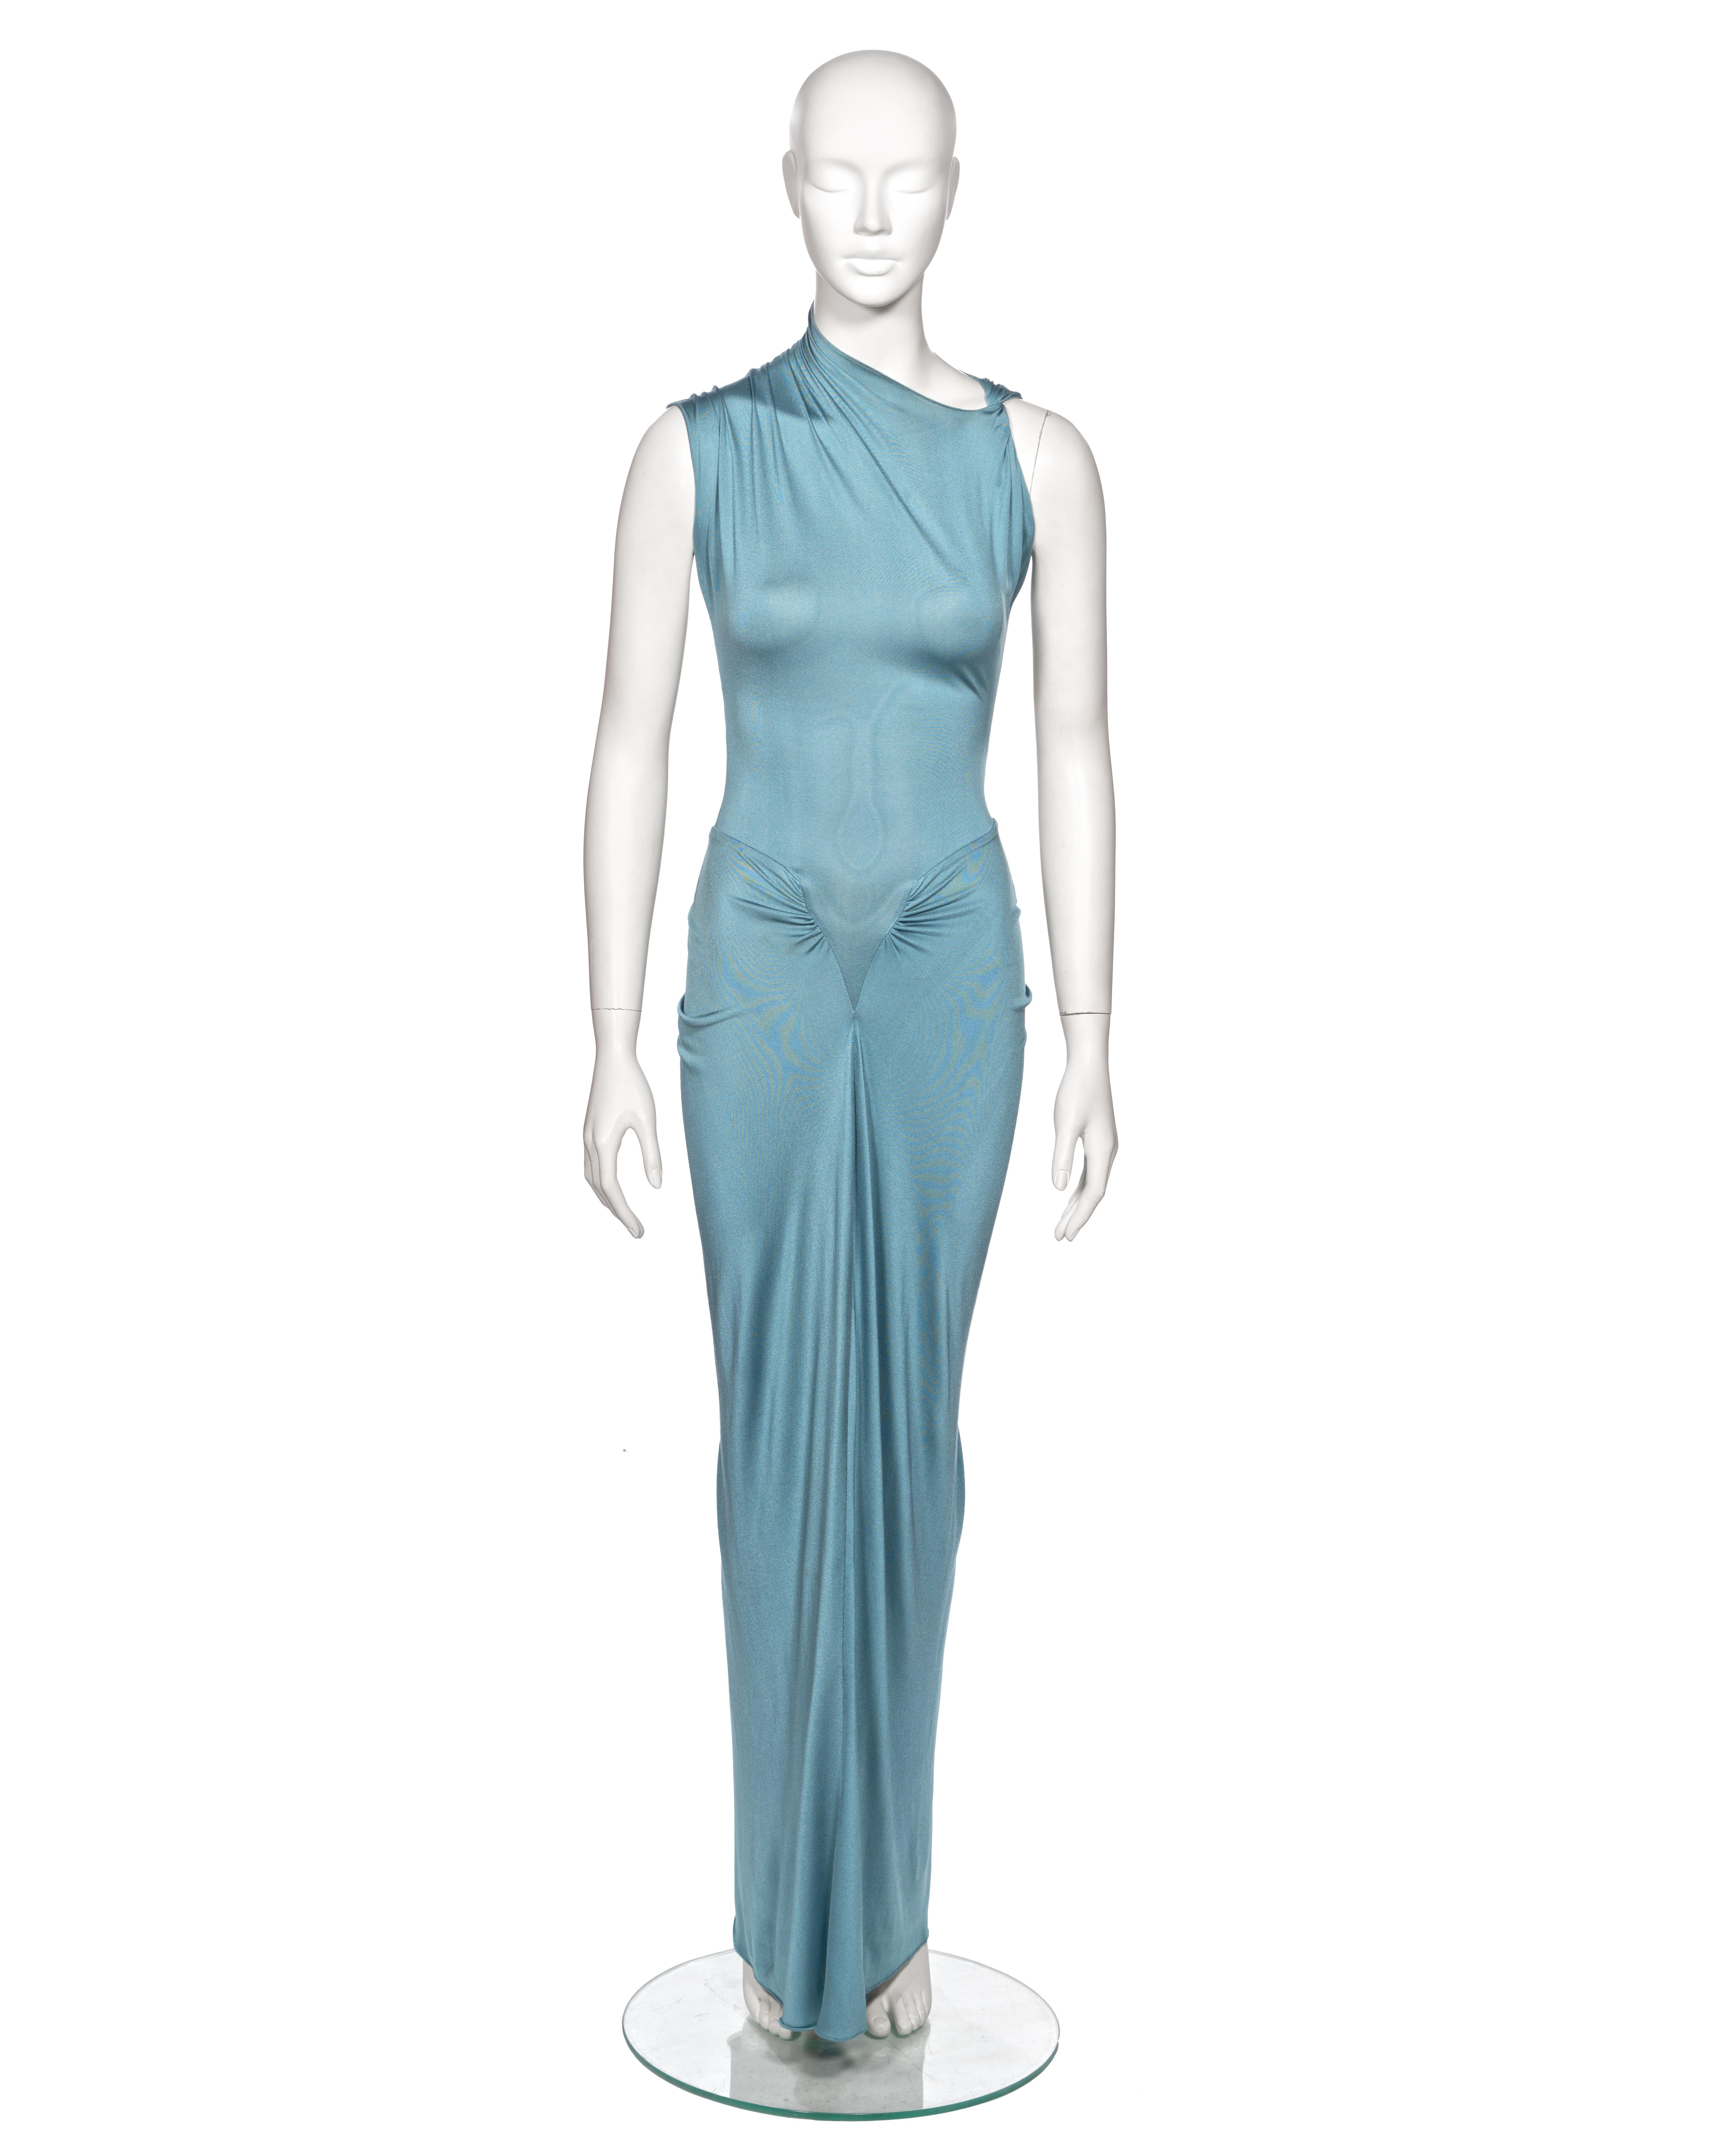 ▪ Rare Christian Dior Evening Dress
▪ Creative Director: John Galliano
▪ Spring-Summer 2000
▪ Sold by One of a Kind Archive
▪ Crafted from powder blue silk jersey, this garment epitomizes elegance and modernity
▪ Features an asymmetric neckline with